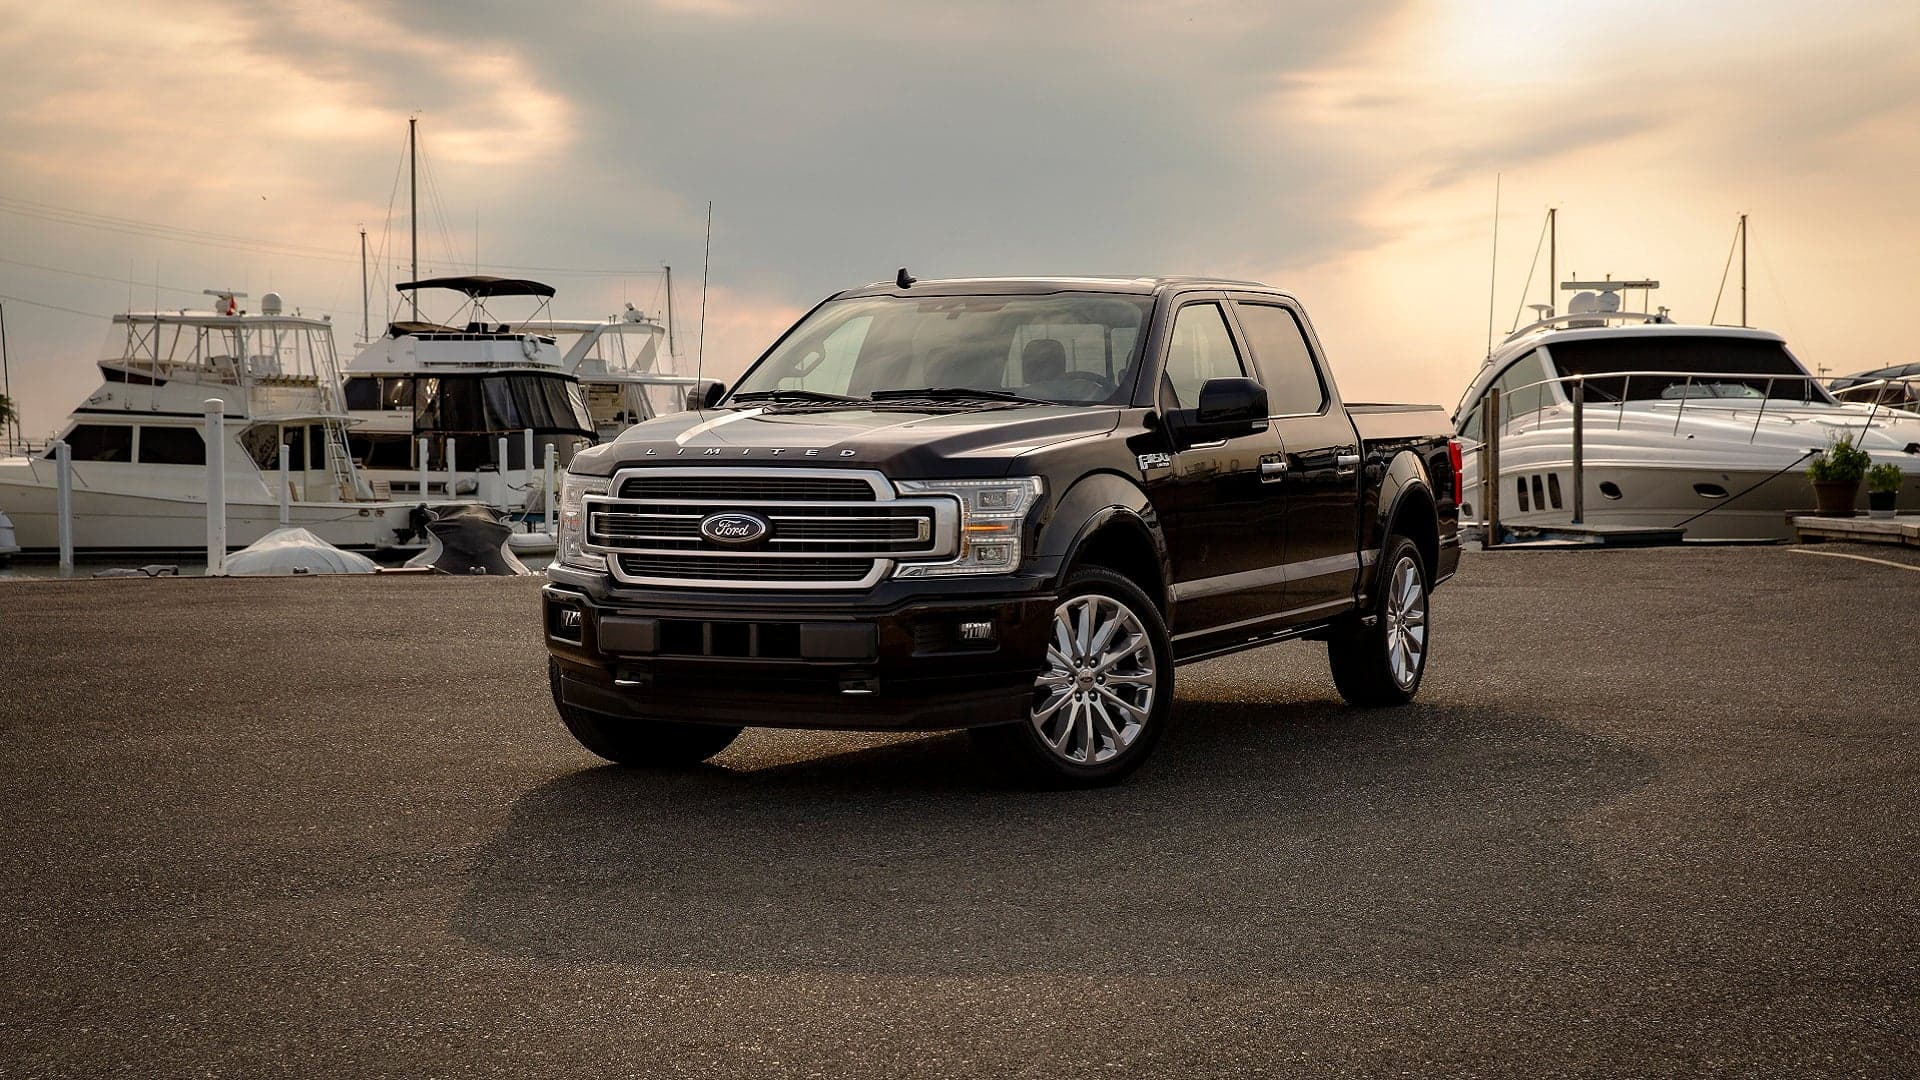 2019 Ford F-150 Limited: The Luxurious Raptor You’ve Been Waiting For